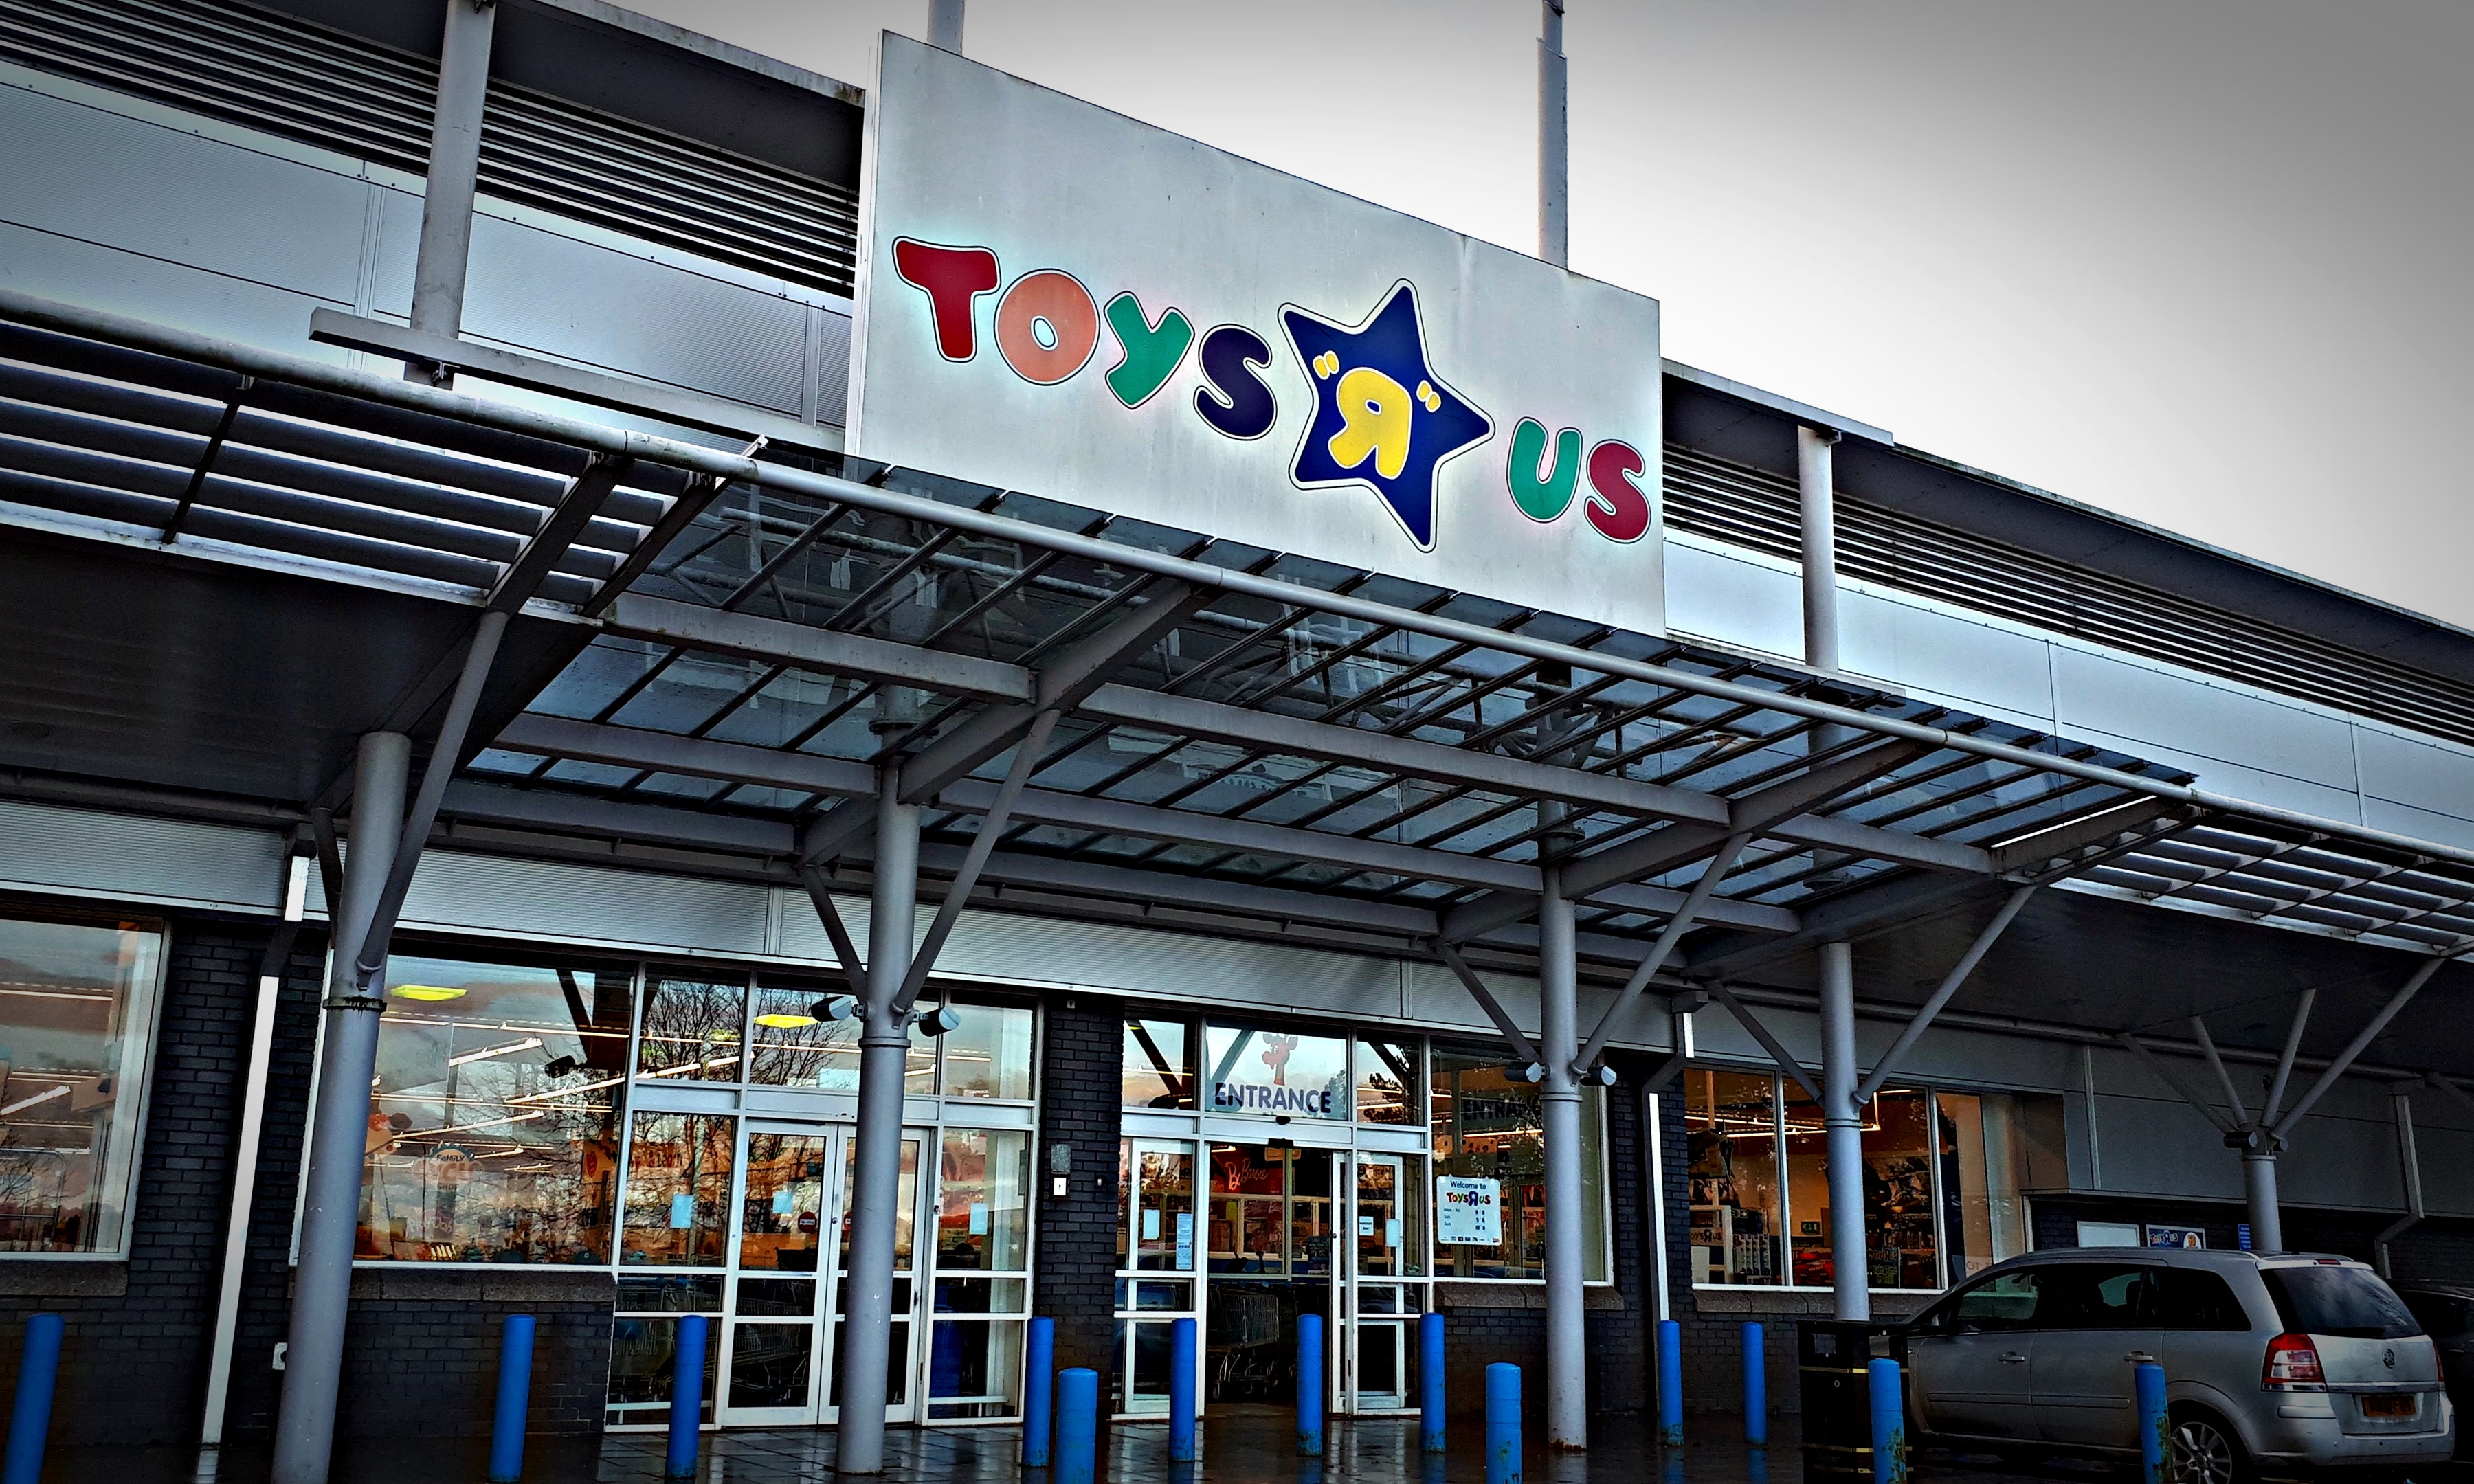 Administrators have started the process of winding up the Toys R Us estate